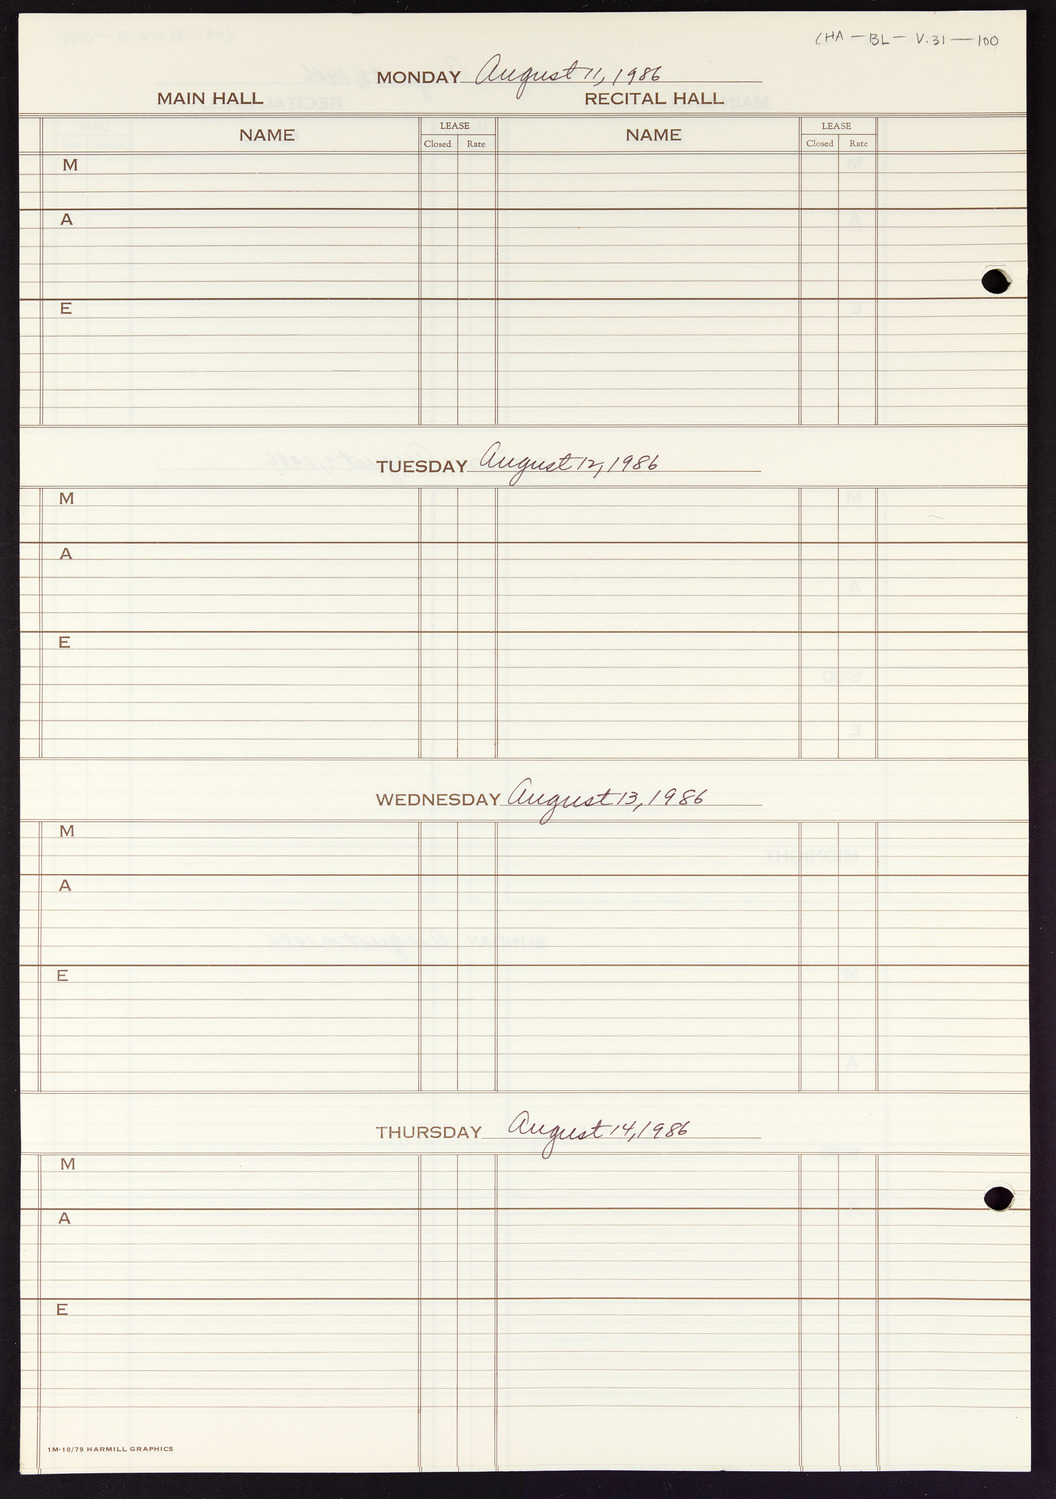 Carnegie Hall Booking Ledger, volume 31, page 100